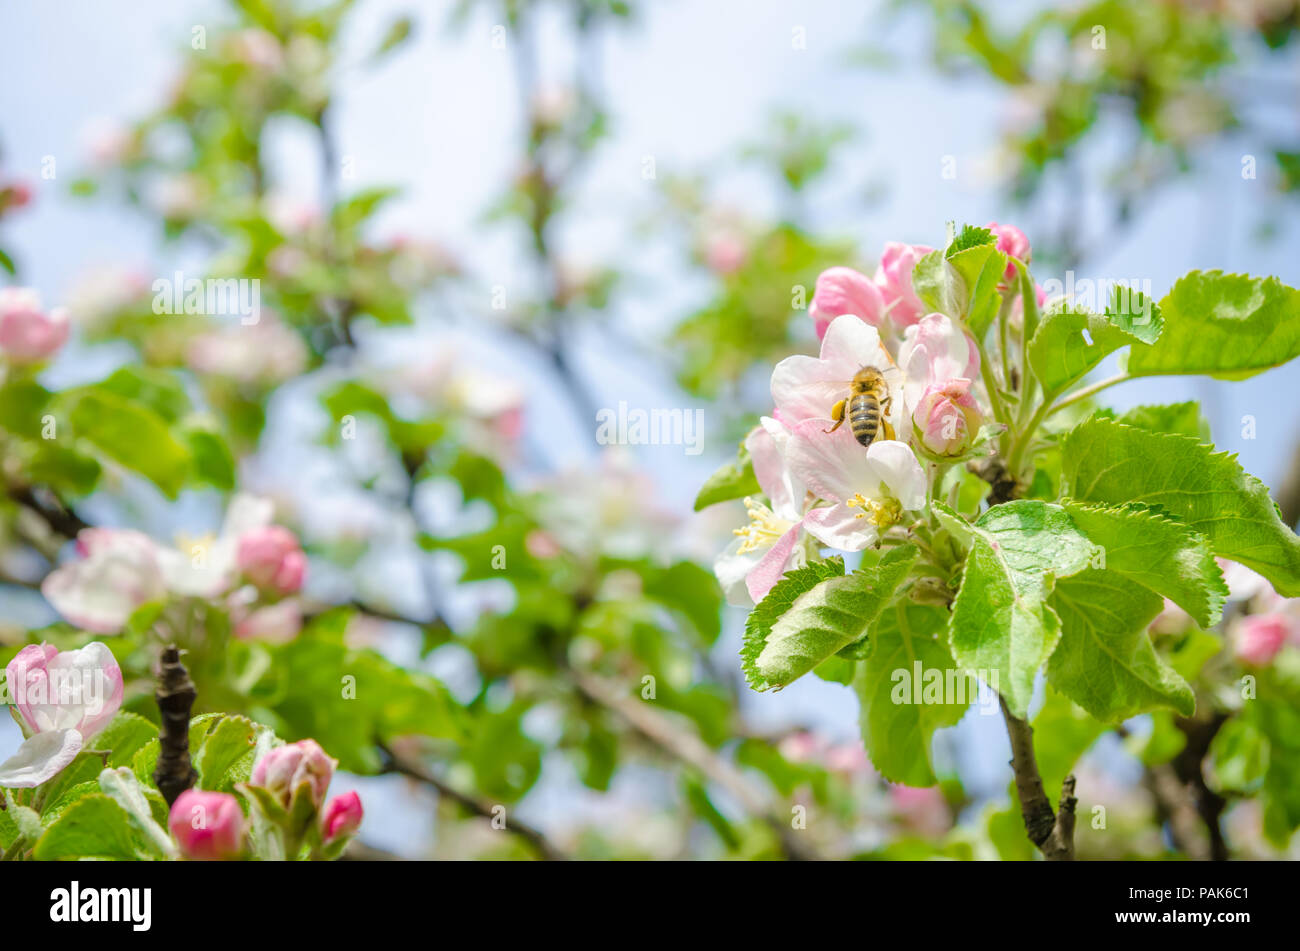 Bee pollinating a white and pink apple flower in a close screen with bright sun light with branches and green leafs on the background Stock Photo